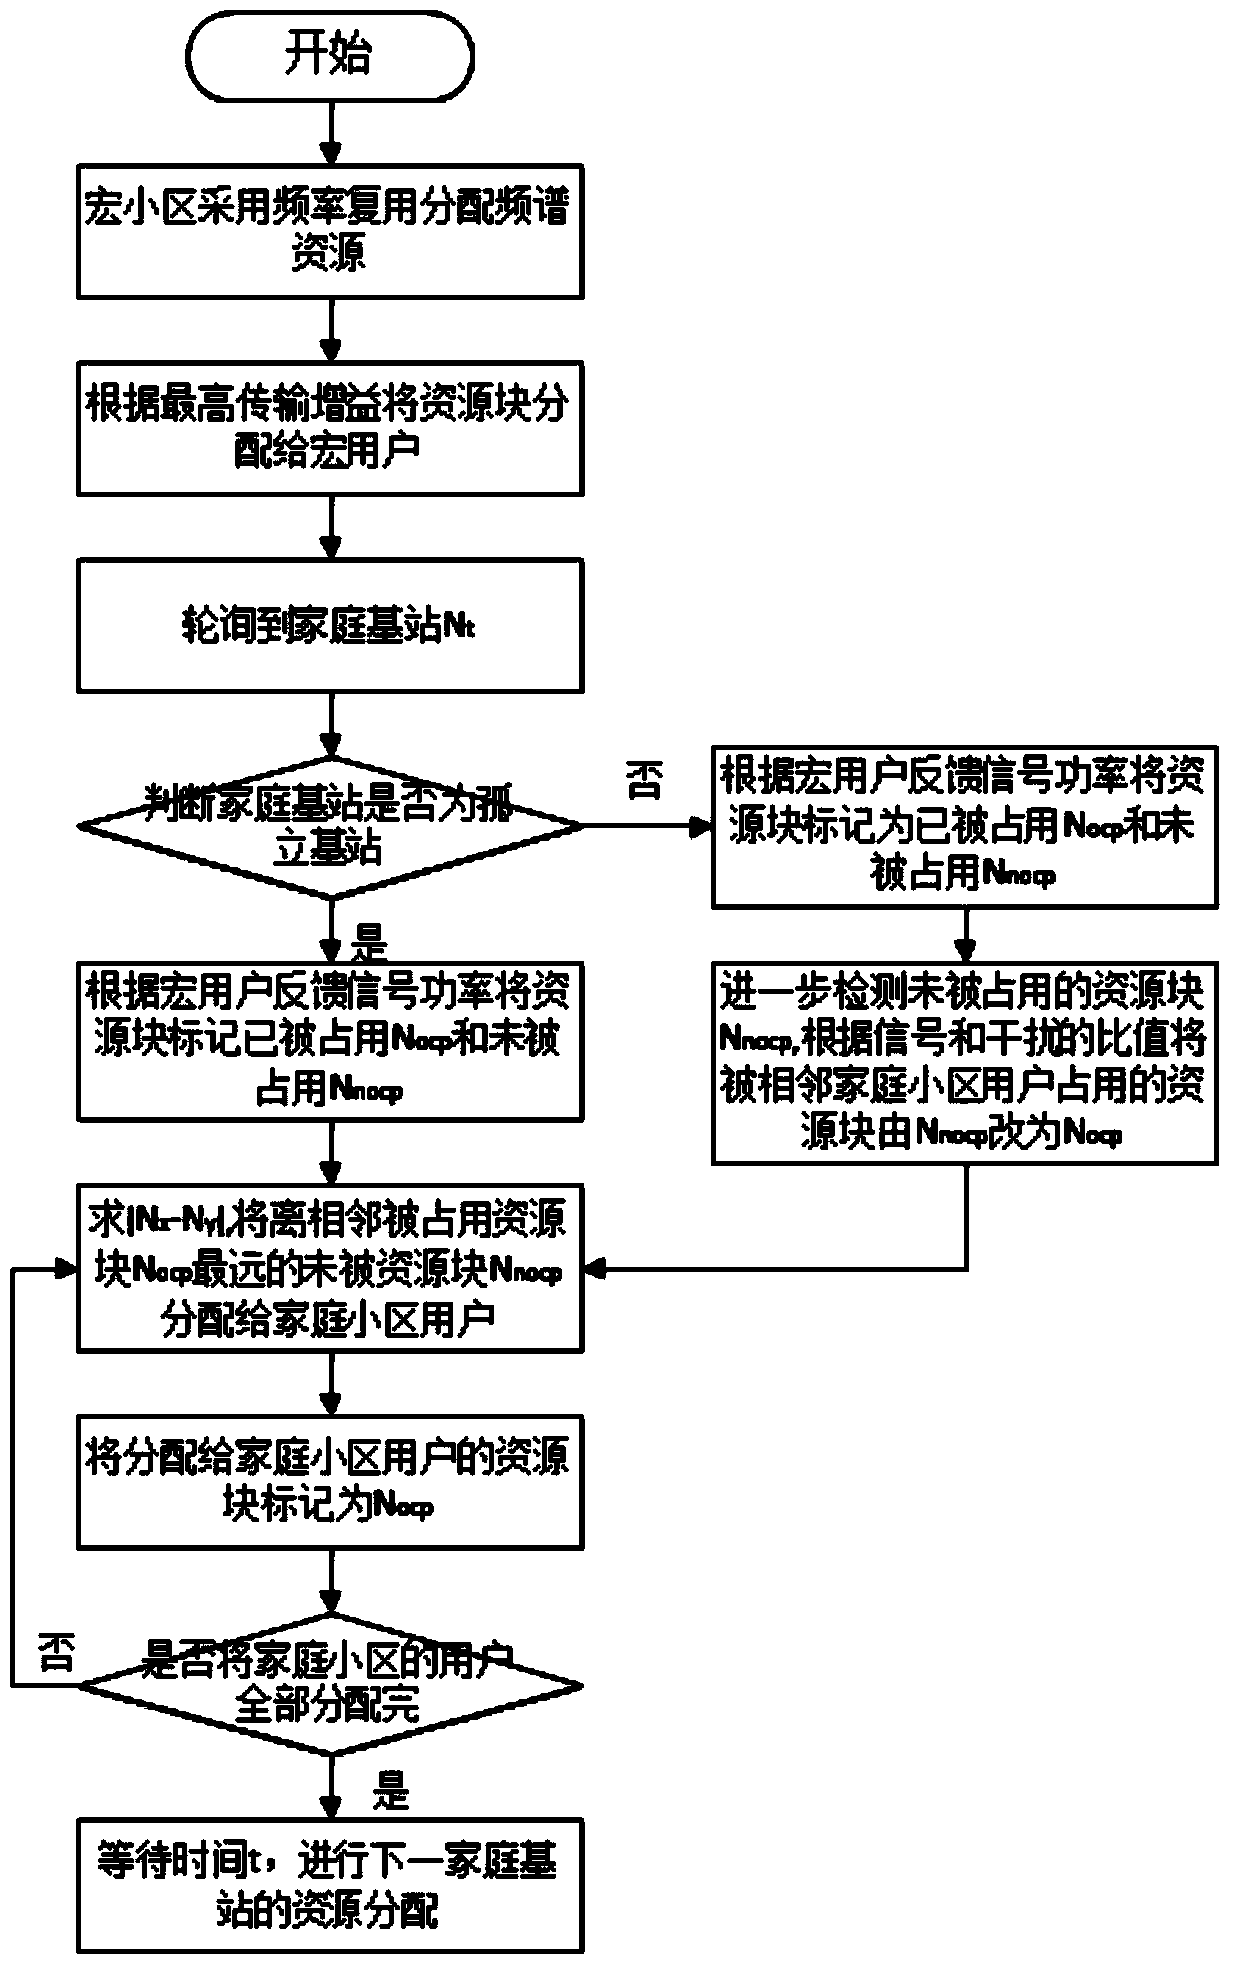 Low-complexity Femtocell spectrum resource distribution method based on cognition